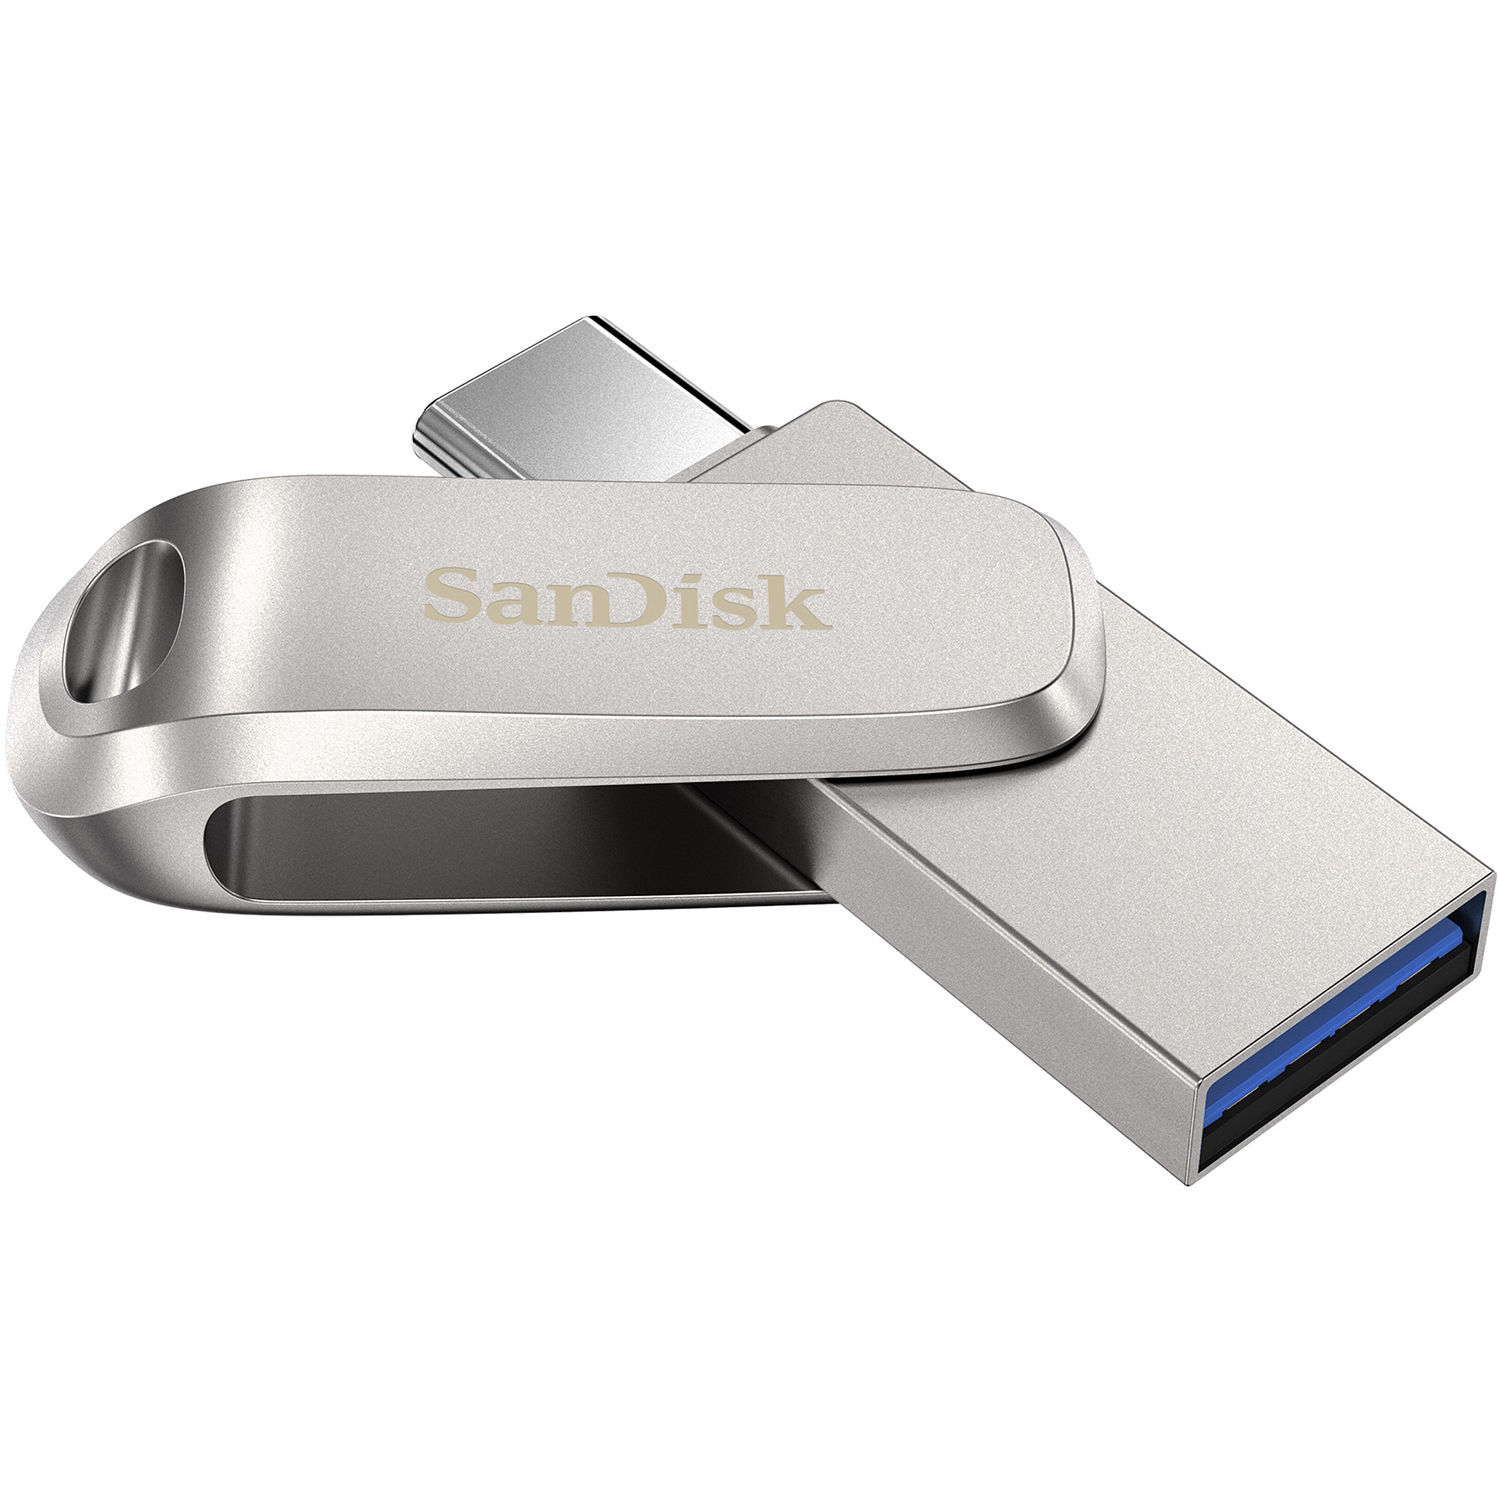 Sandisk Ultra Dual Drive Luxe Usb 3.1 Flash Drive 32Gb Usb Type C Type a